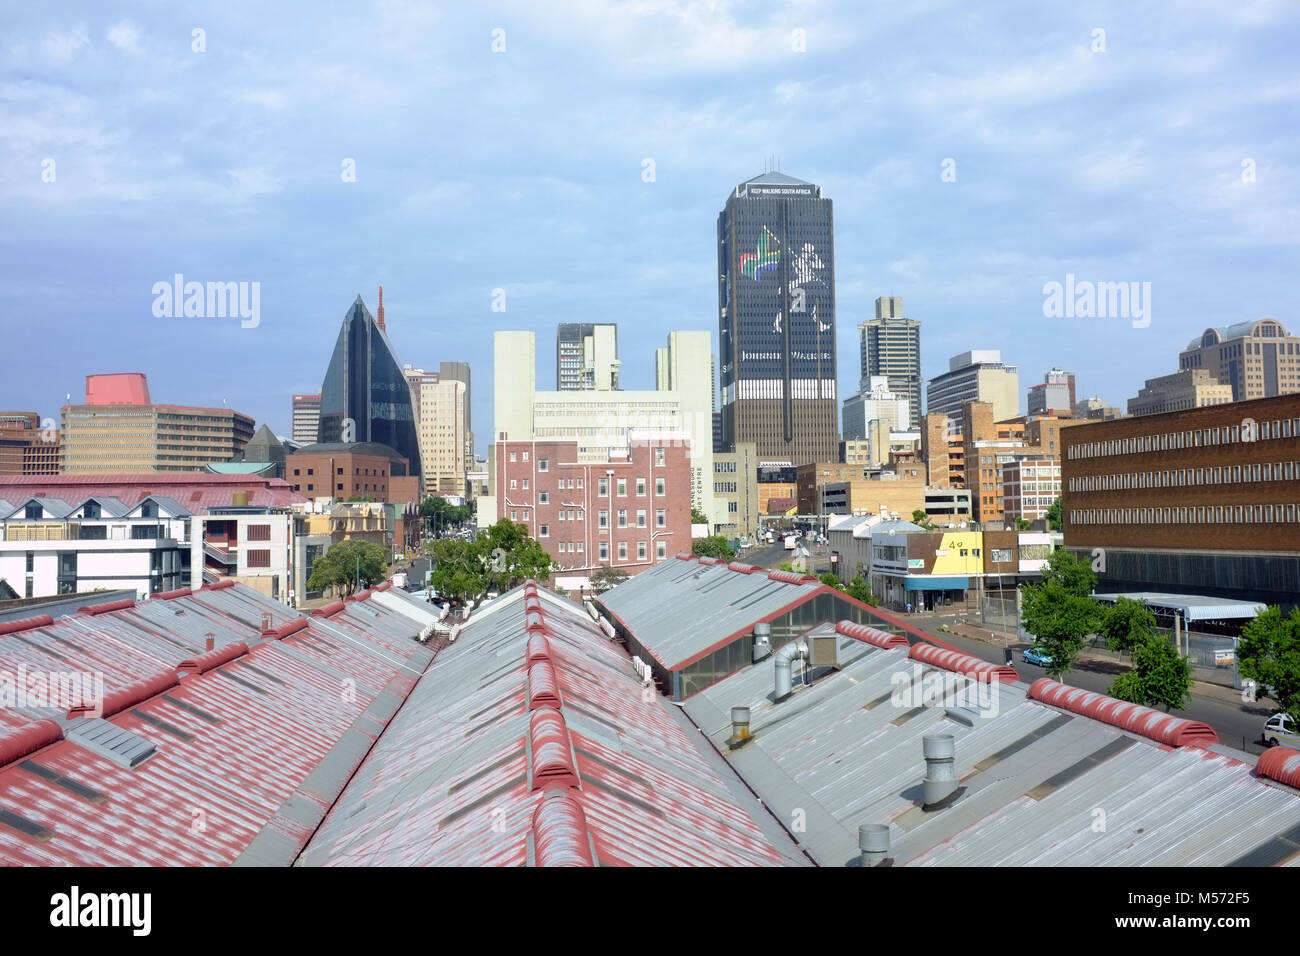 Johannesburg CBD (Central Business District) in Sud Africa Foto Stock